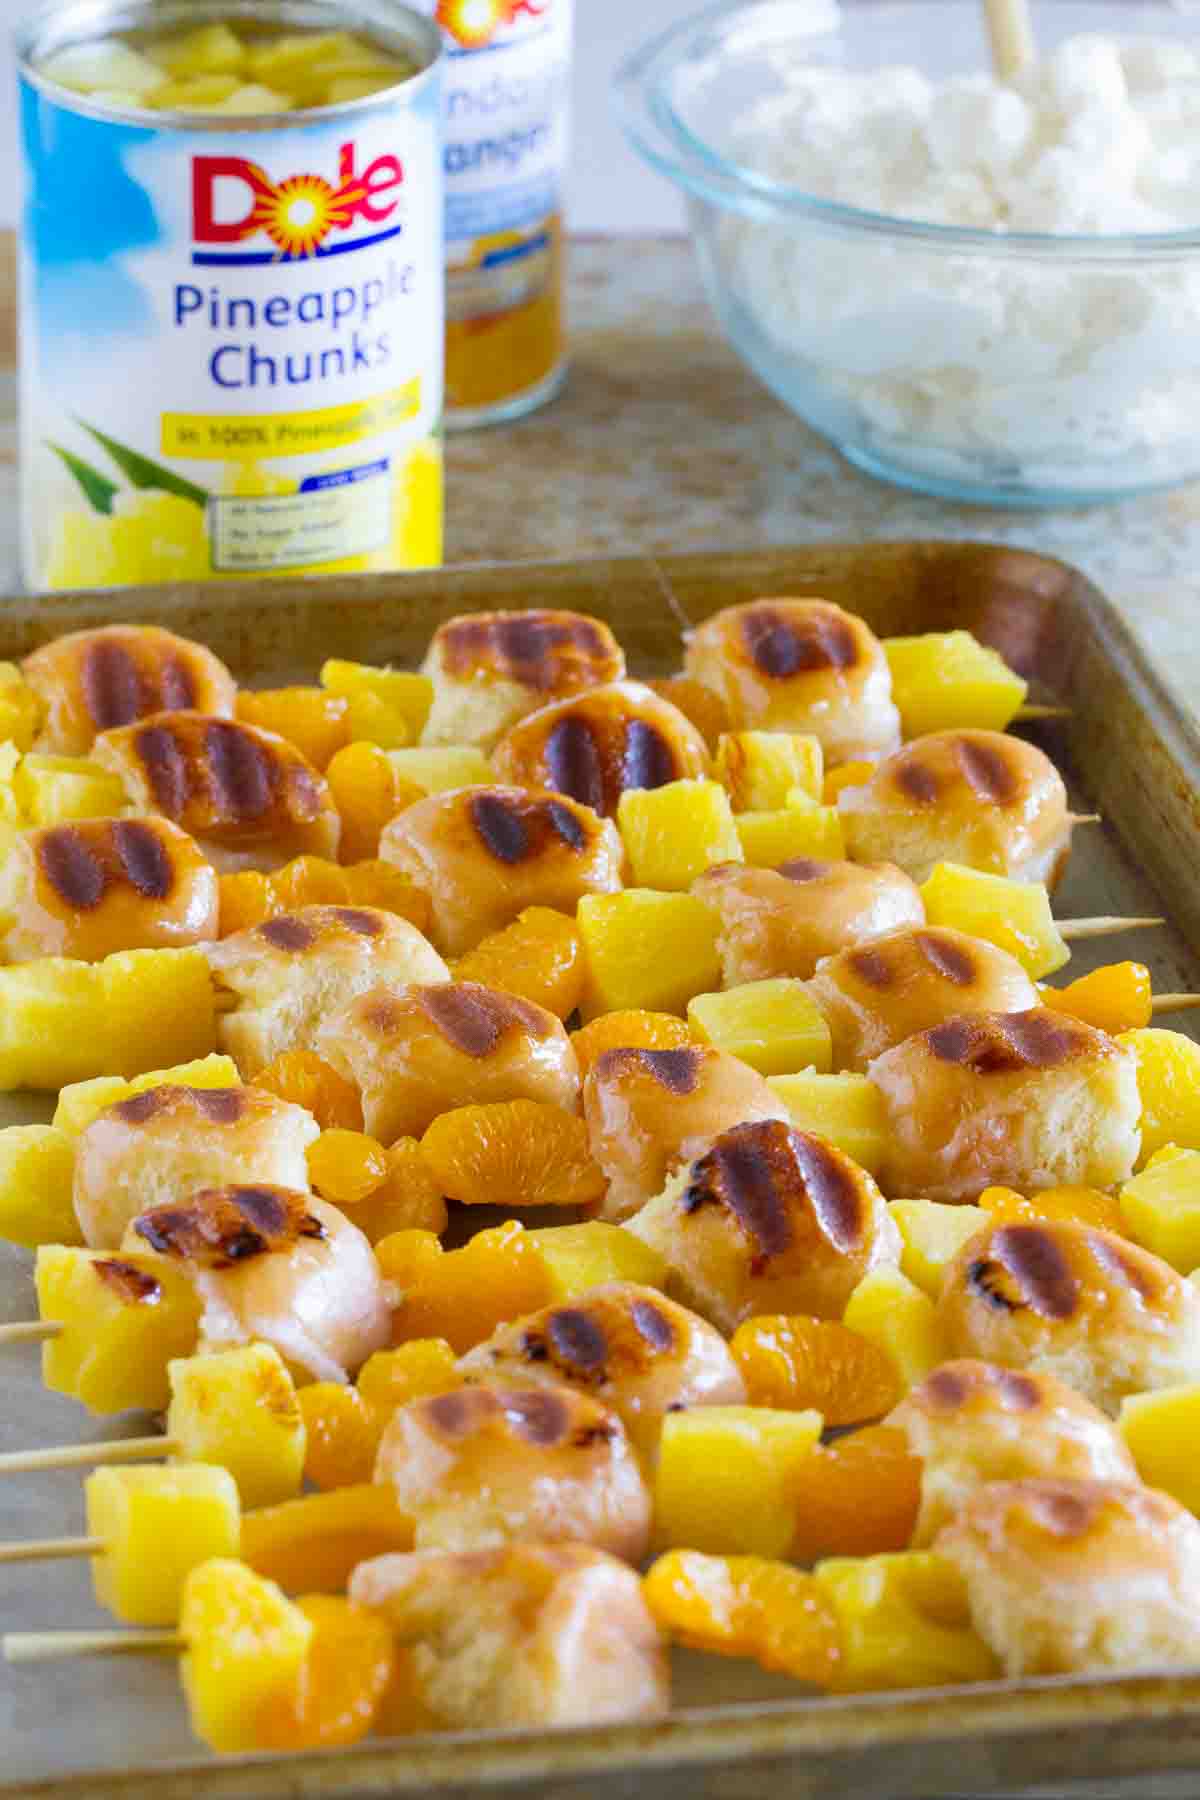 Grilled kabobs with donuts, pineapple, and oranges